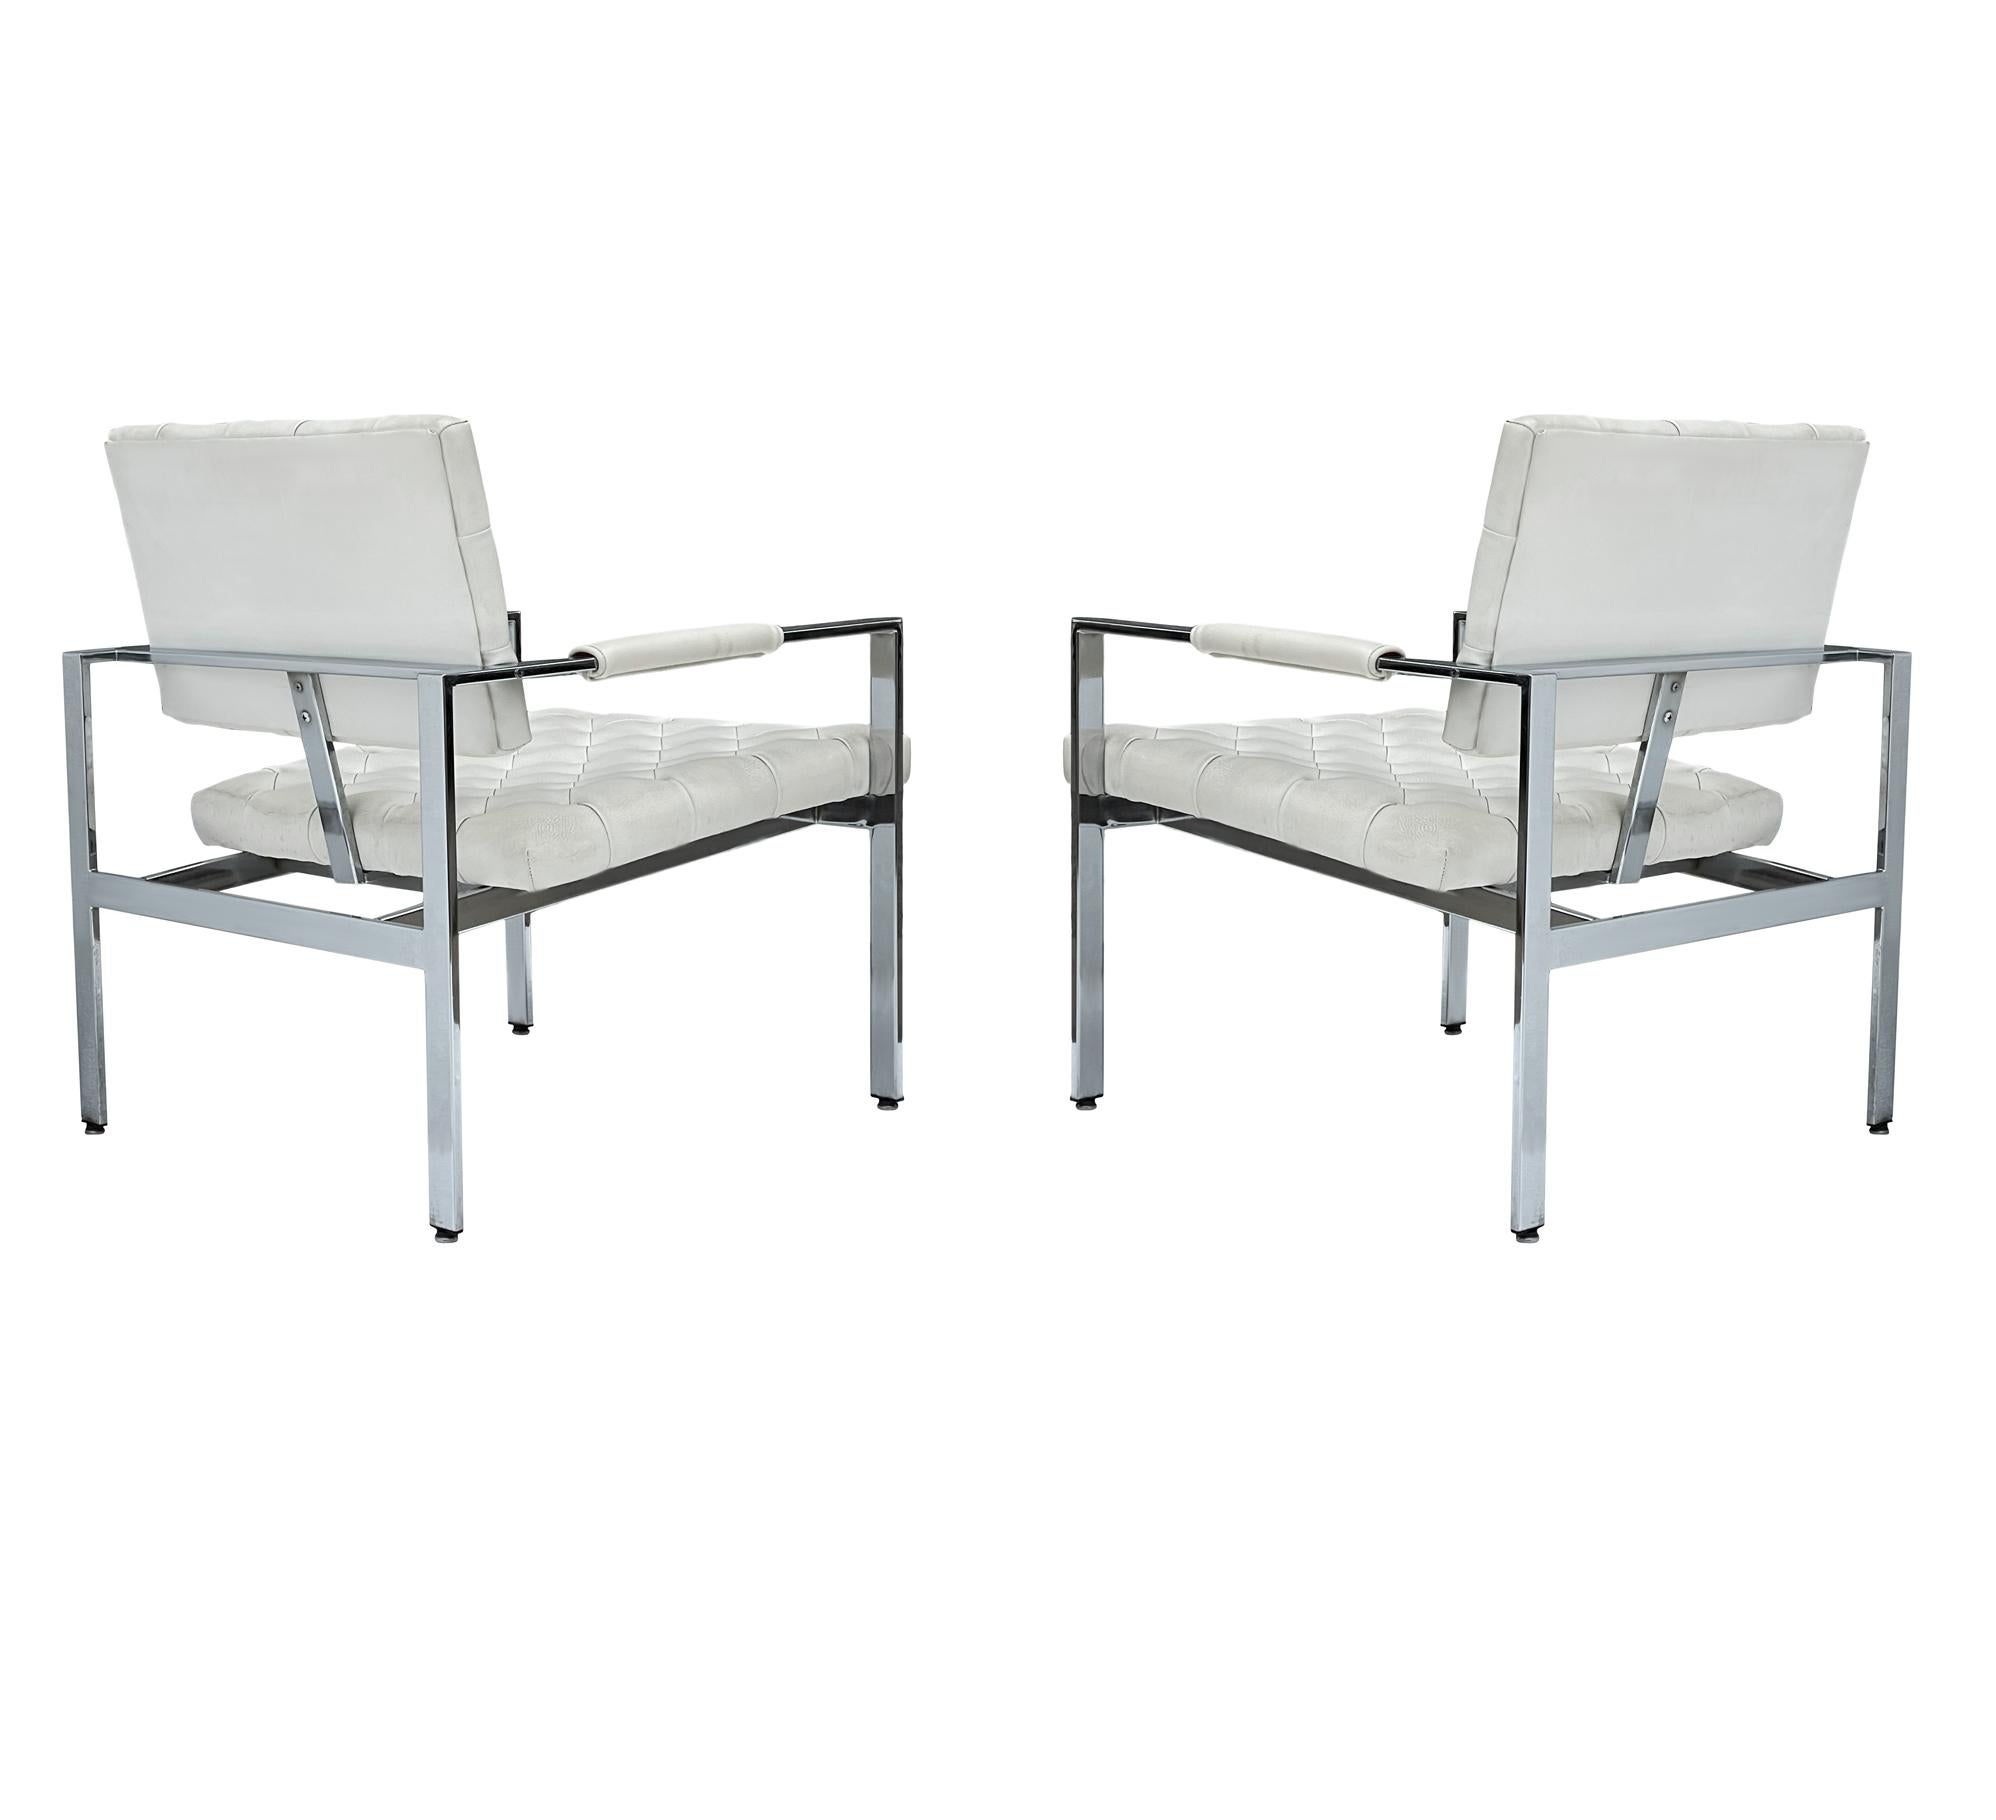 Pair Mid-Century Modern Chrome & White Tufted Lounge Chairs After Harvey Probber For Sale 7